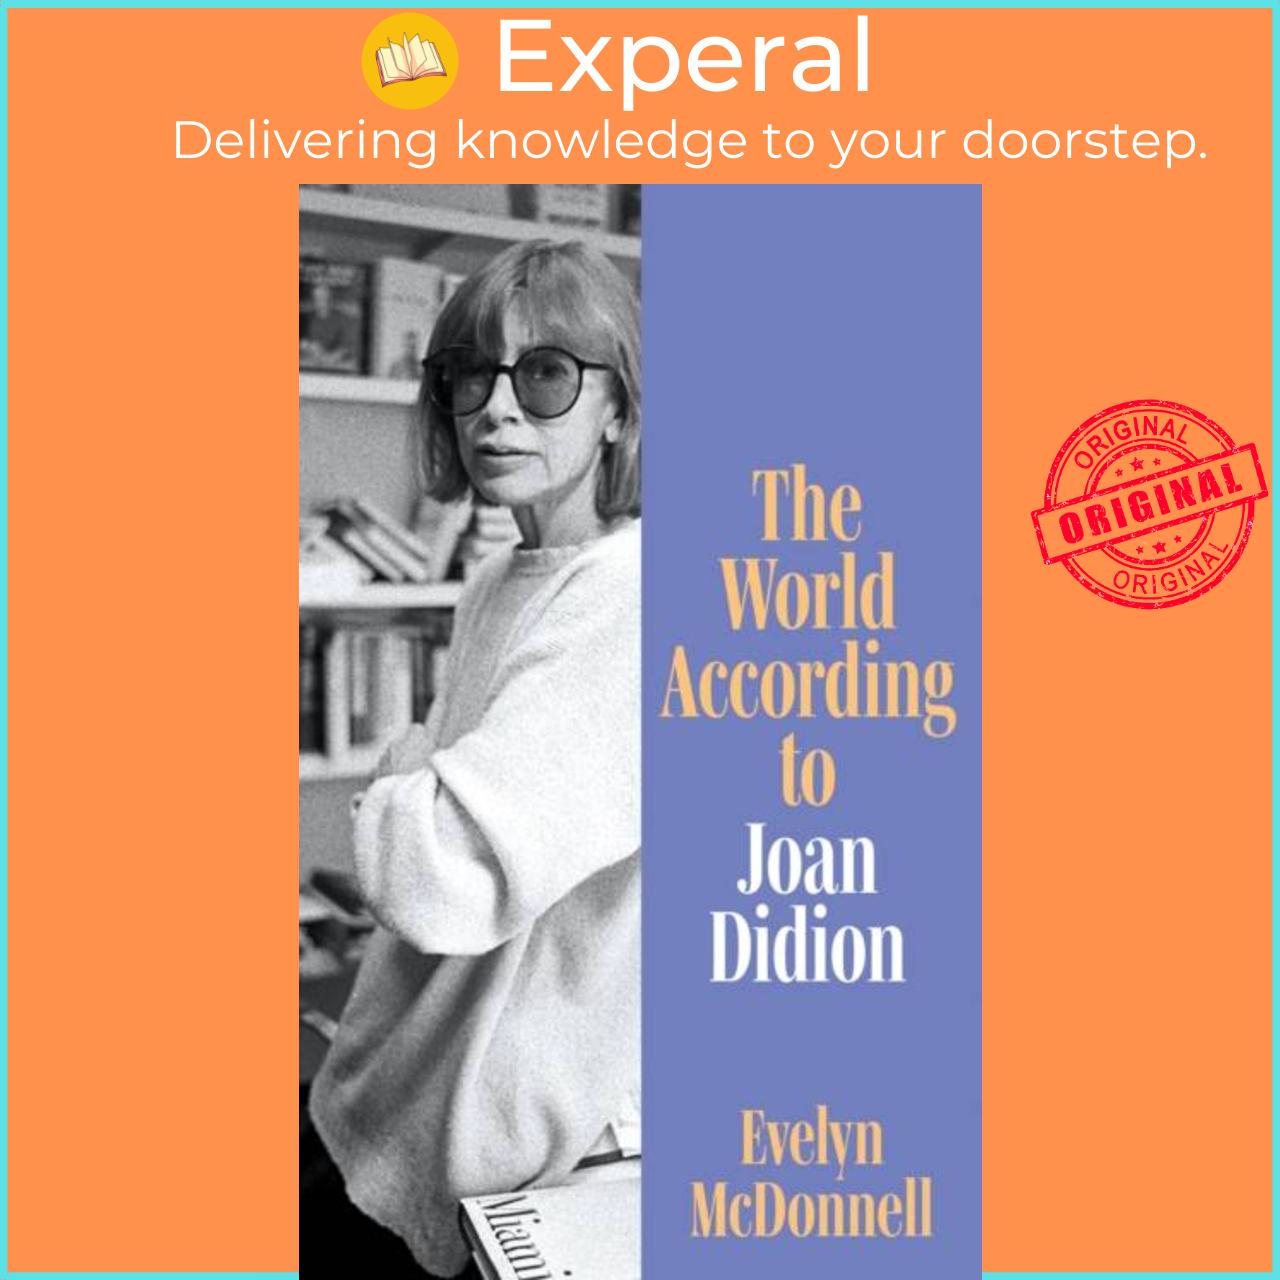 Sách - The World According to Joan Didion by Evelyn McDonnell (UK edition, hardcover)